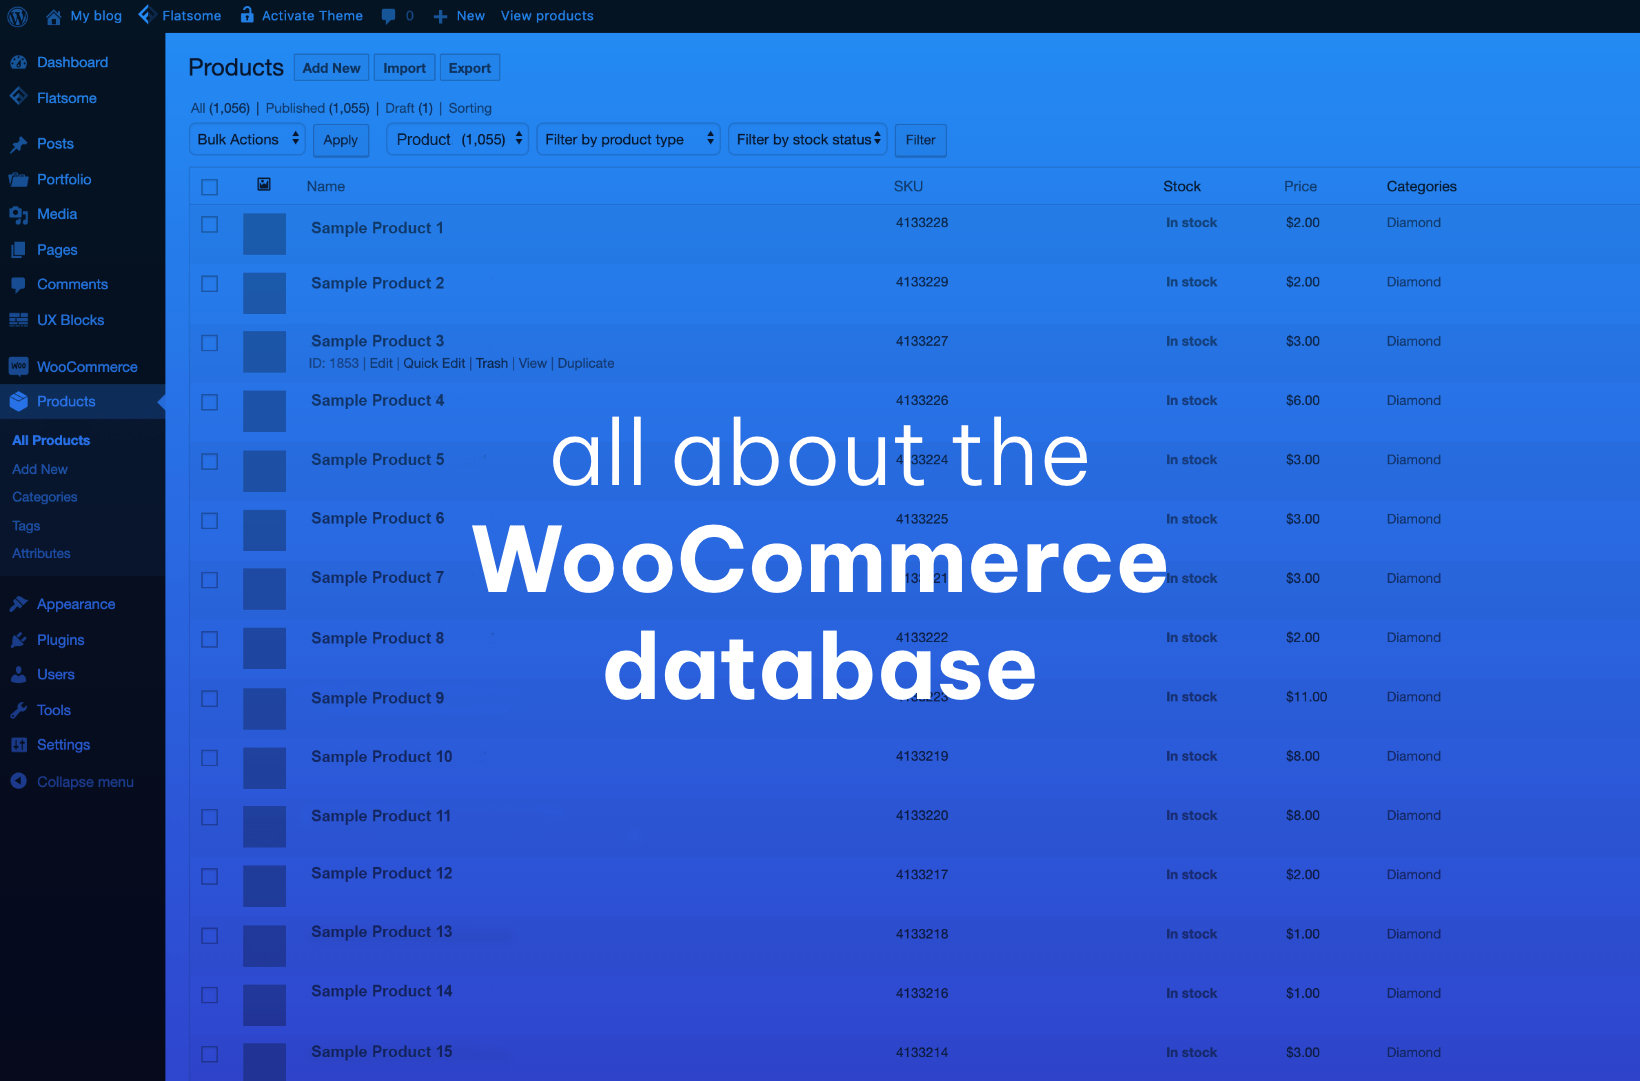 Everything You Need to Know About the WooCommerce Database: How It Works, Schema, and More